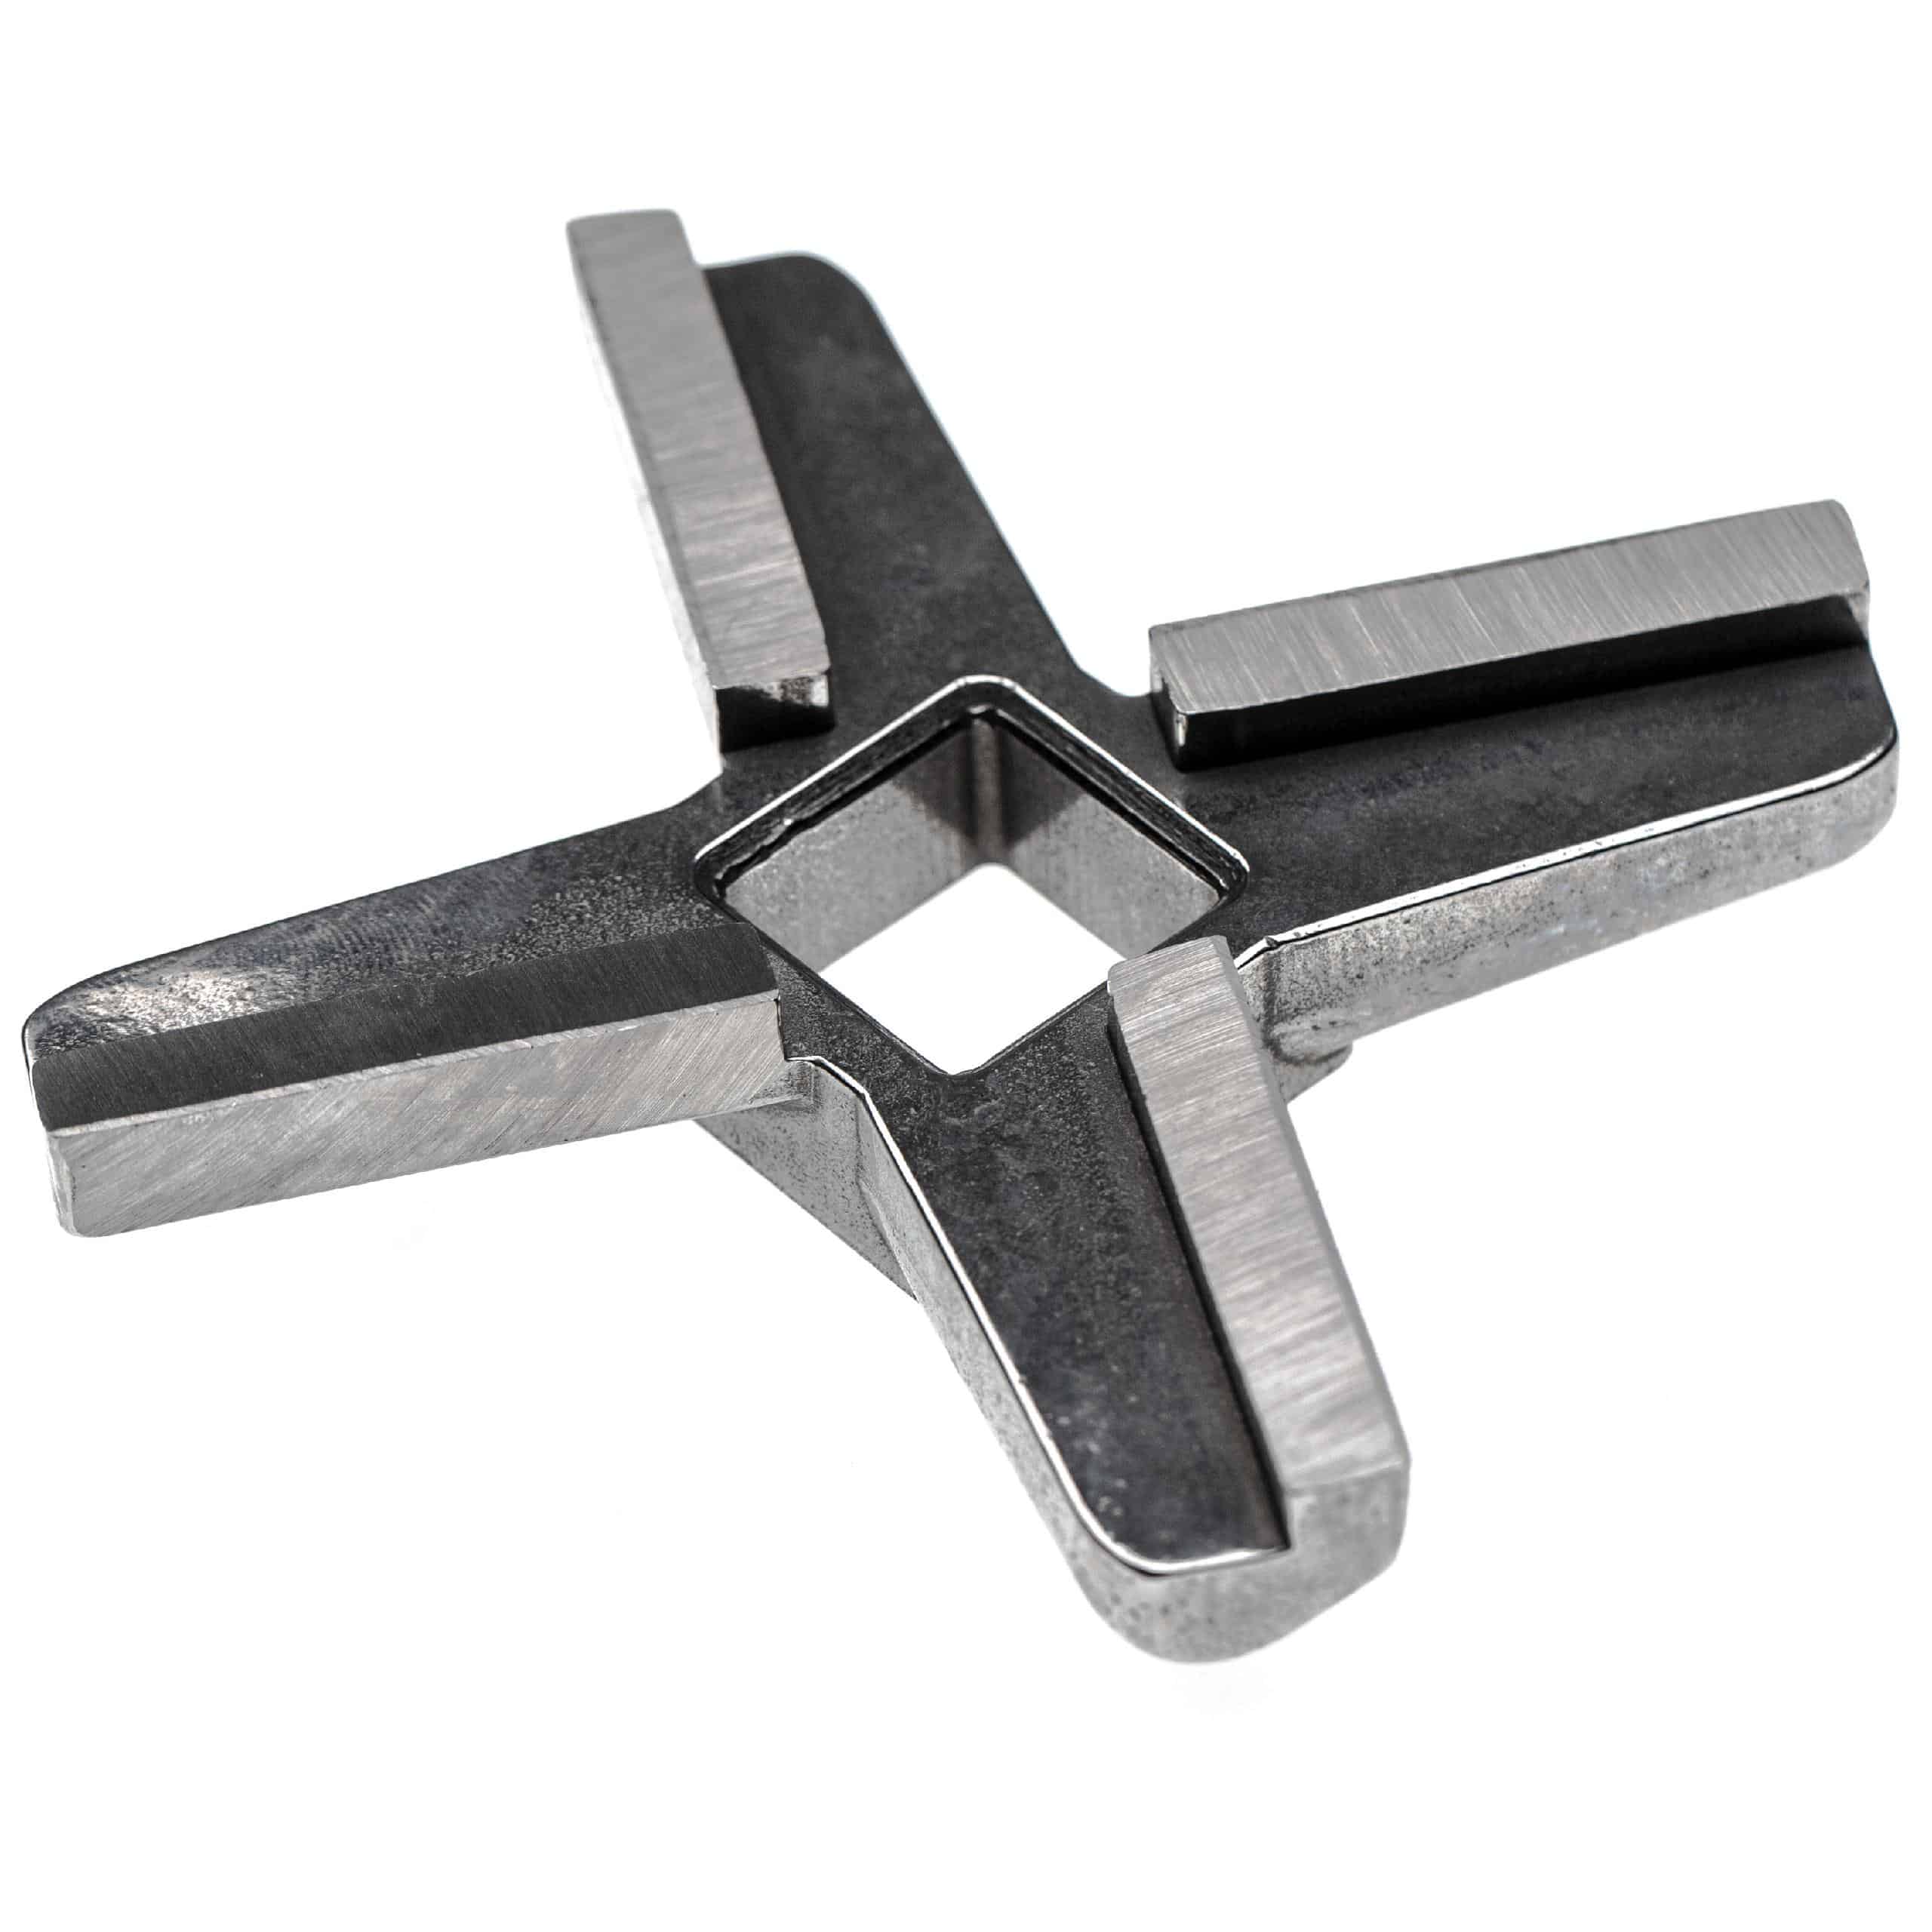 Meat Grinder Knife Size 42, 22.1 x 22.1 mm e.g. compatible with ADE, Caso, Fama, KBS - stainless steel